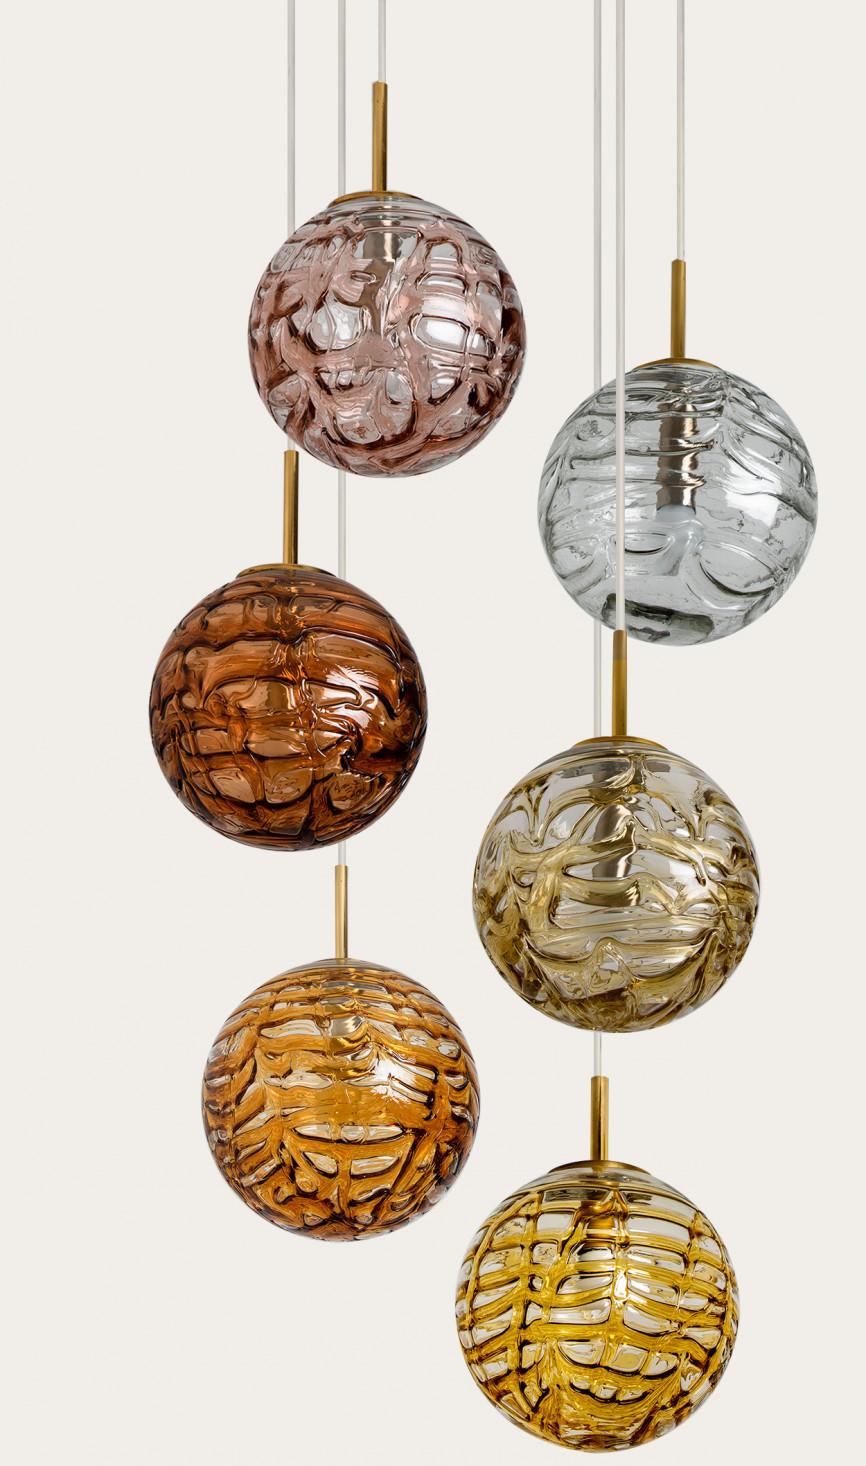 Absolutely amazing huge ceiling mount pendant light fixture with eight different globes by Doria Leuchten, manufacturered around 1960s. With hand blown murano glass globes in 11.8